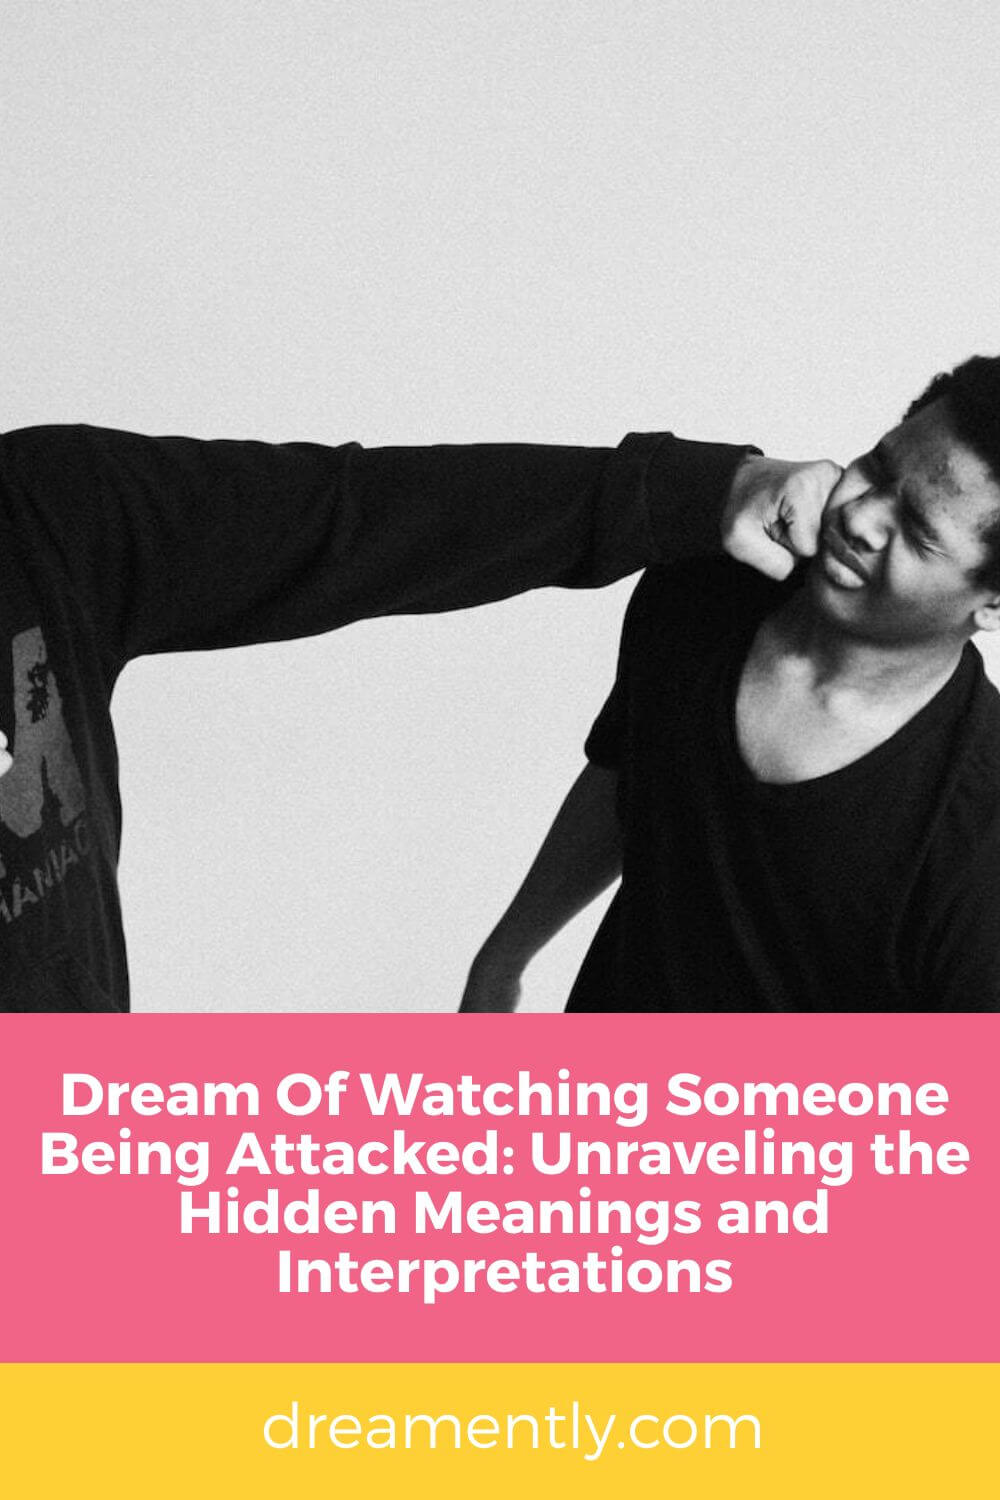 Dream Of Watching Someone Being Attacked- Unraveling the Hidden Meanings and Interpretations (1)